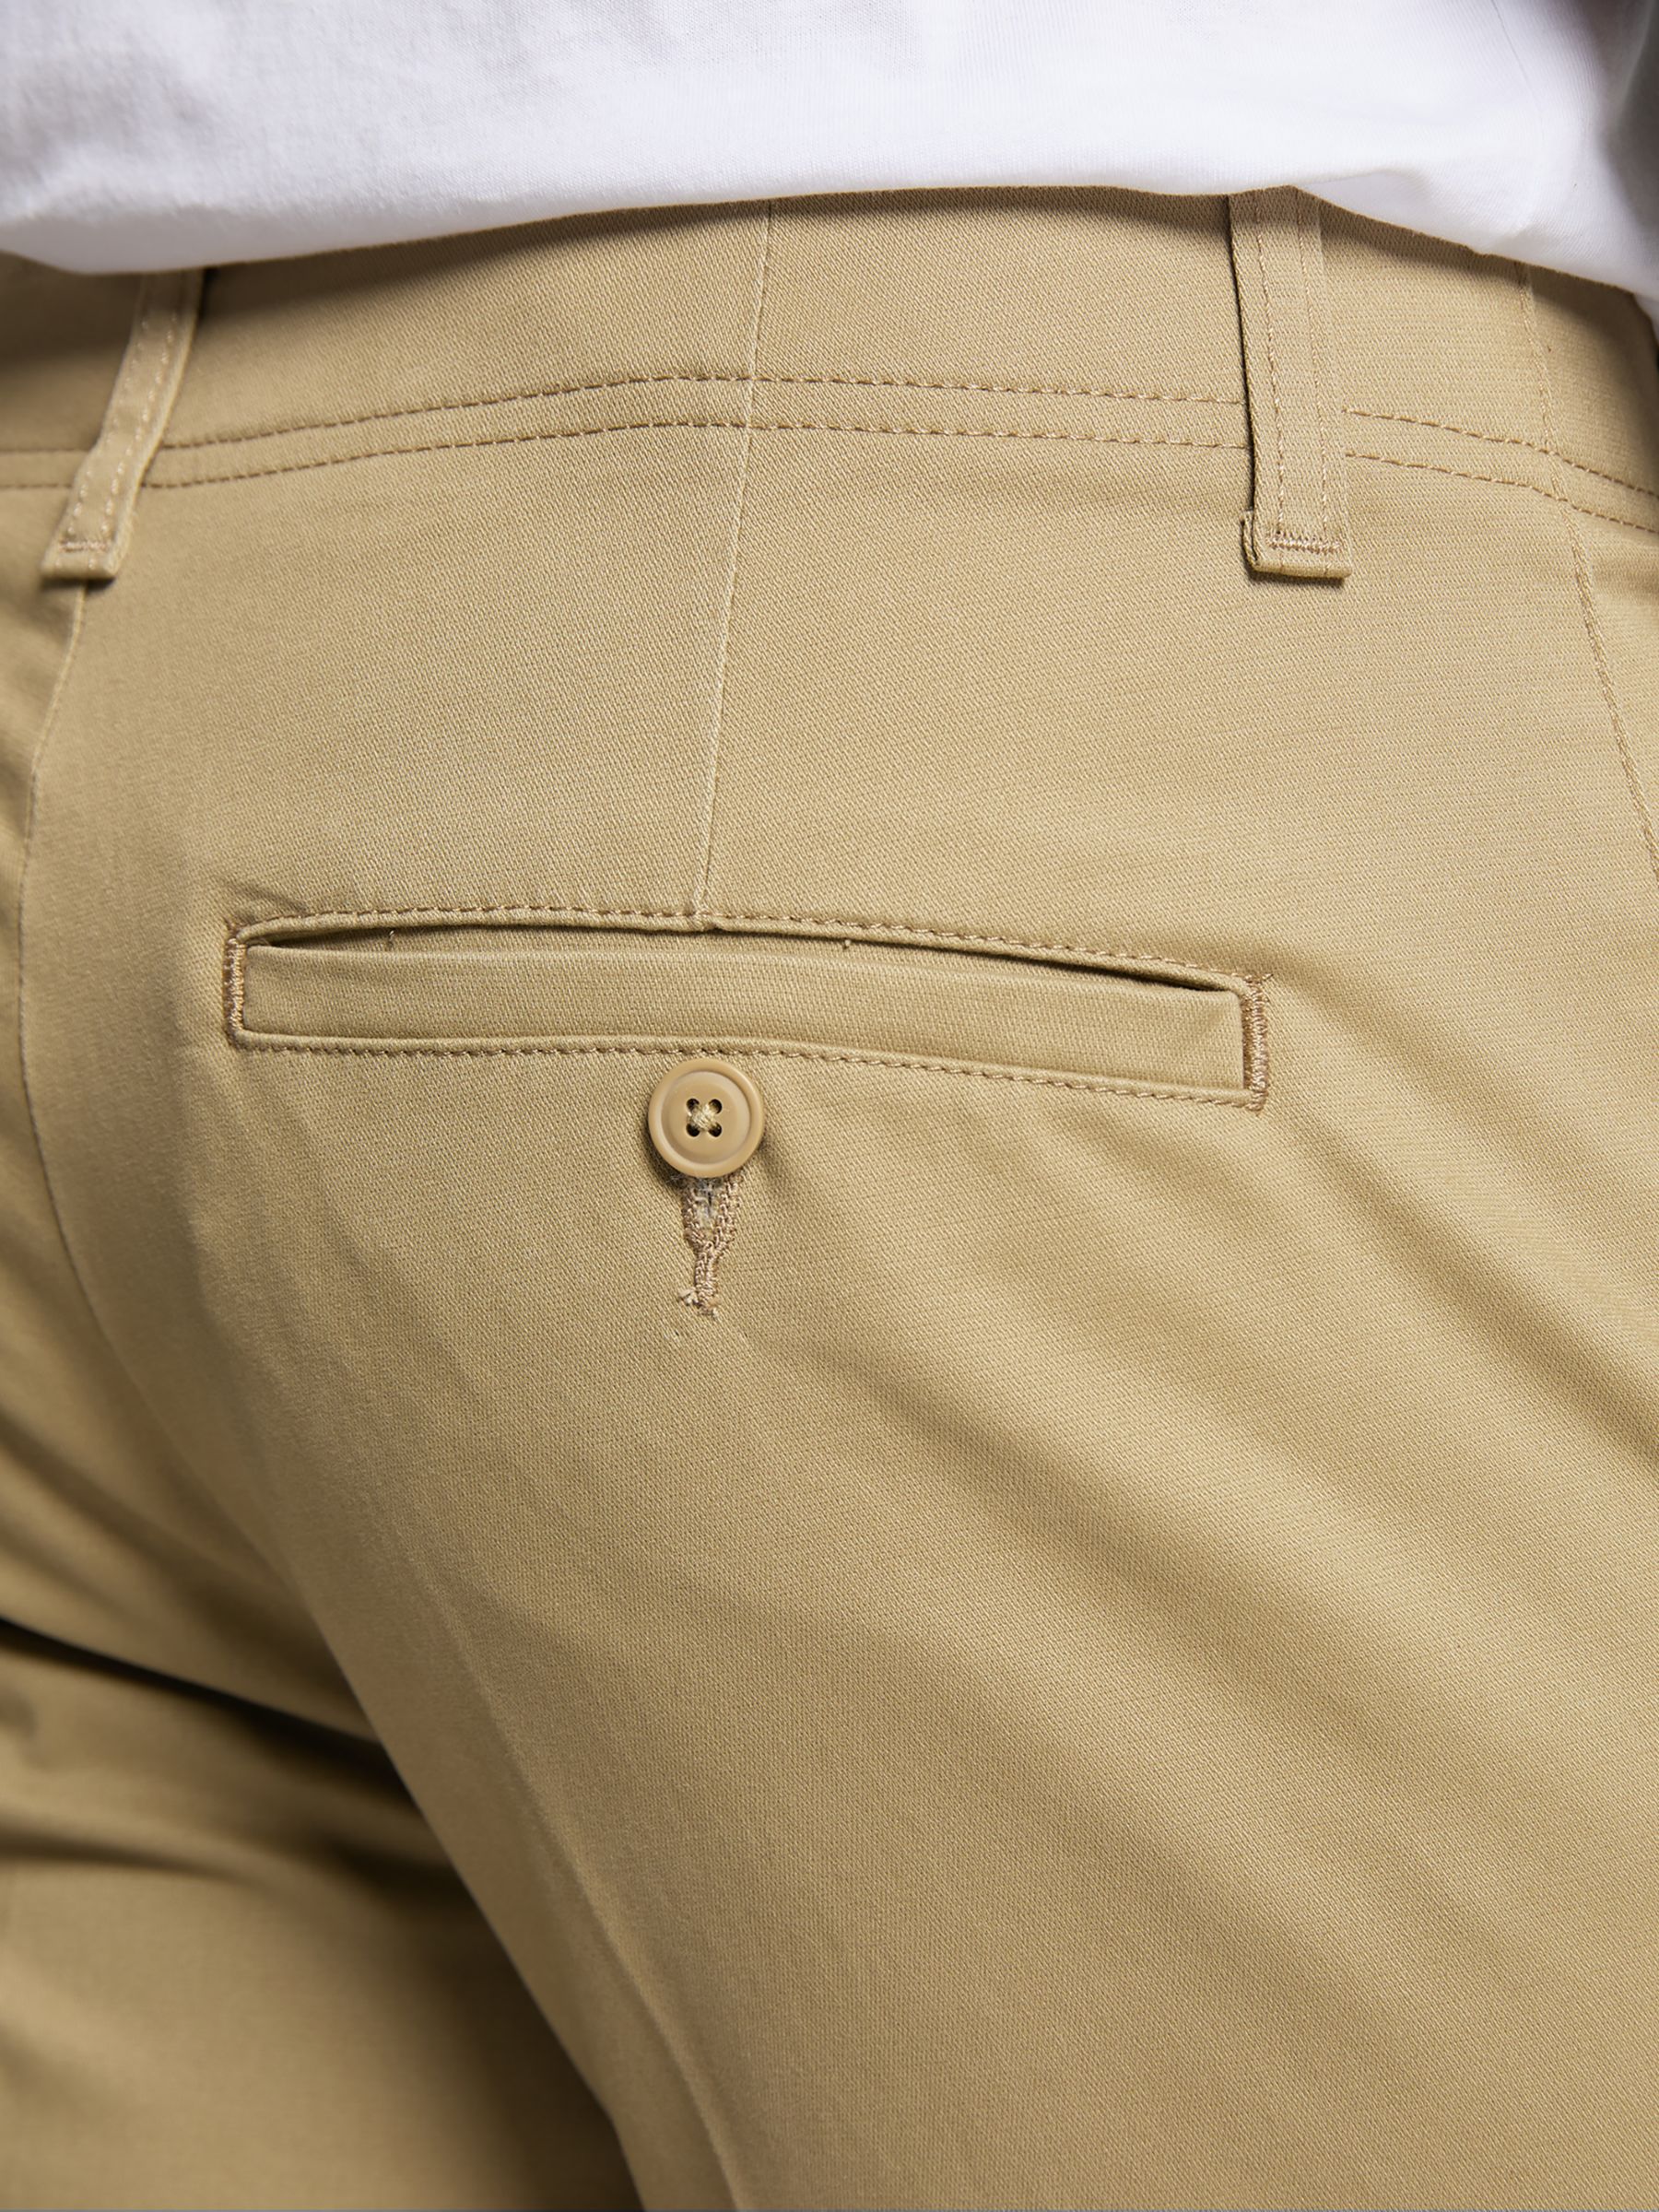 Buy Lee Cotton Blend Chinos Online at johnlewis.com